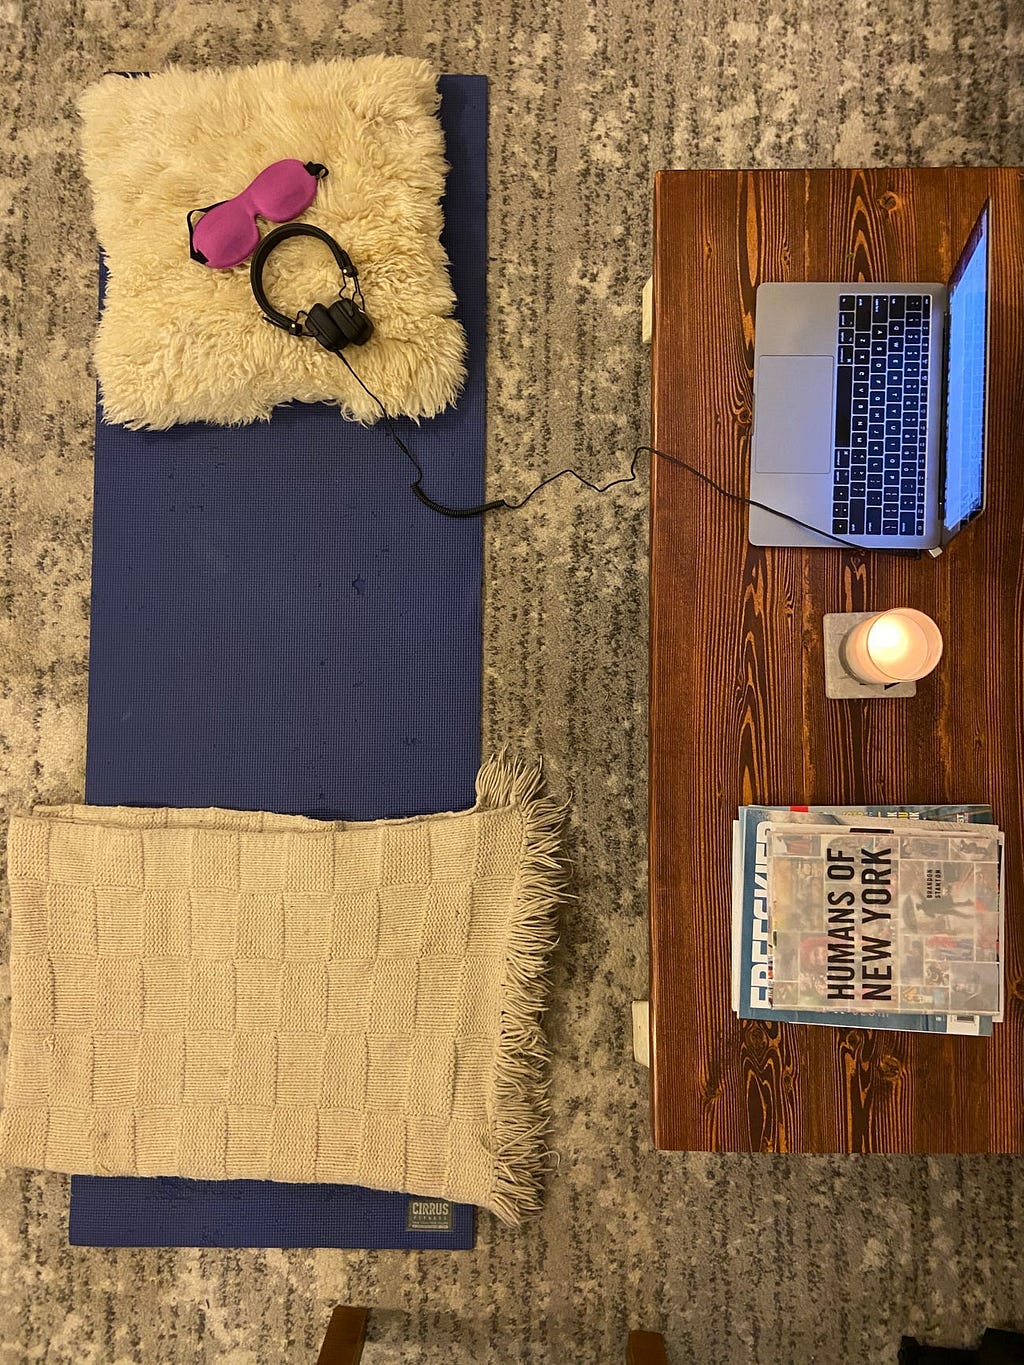 The author’s set up includes a yoga mat, her laptop, and a candle.